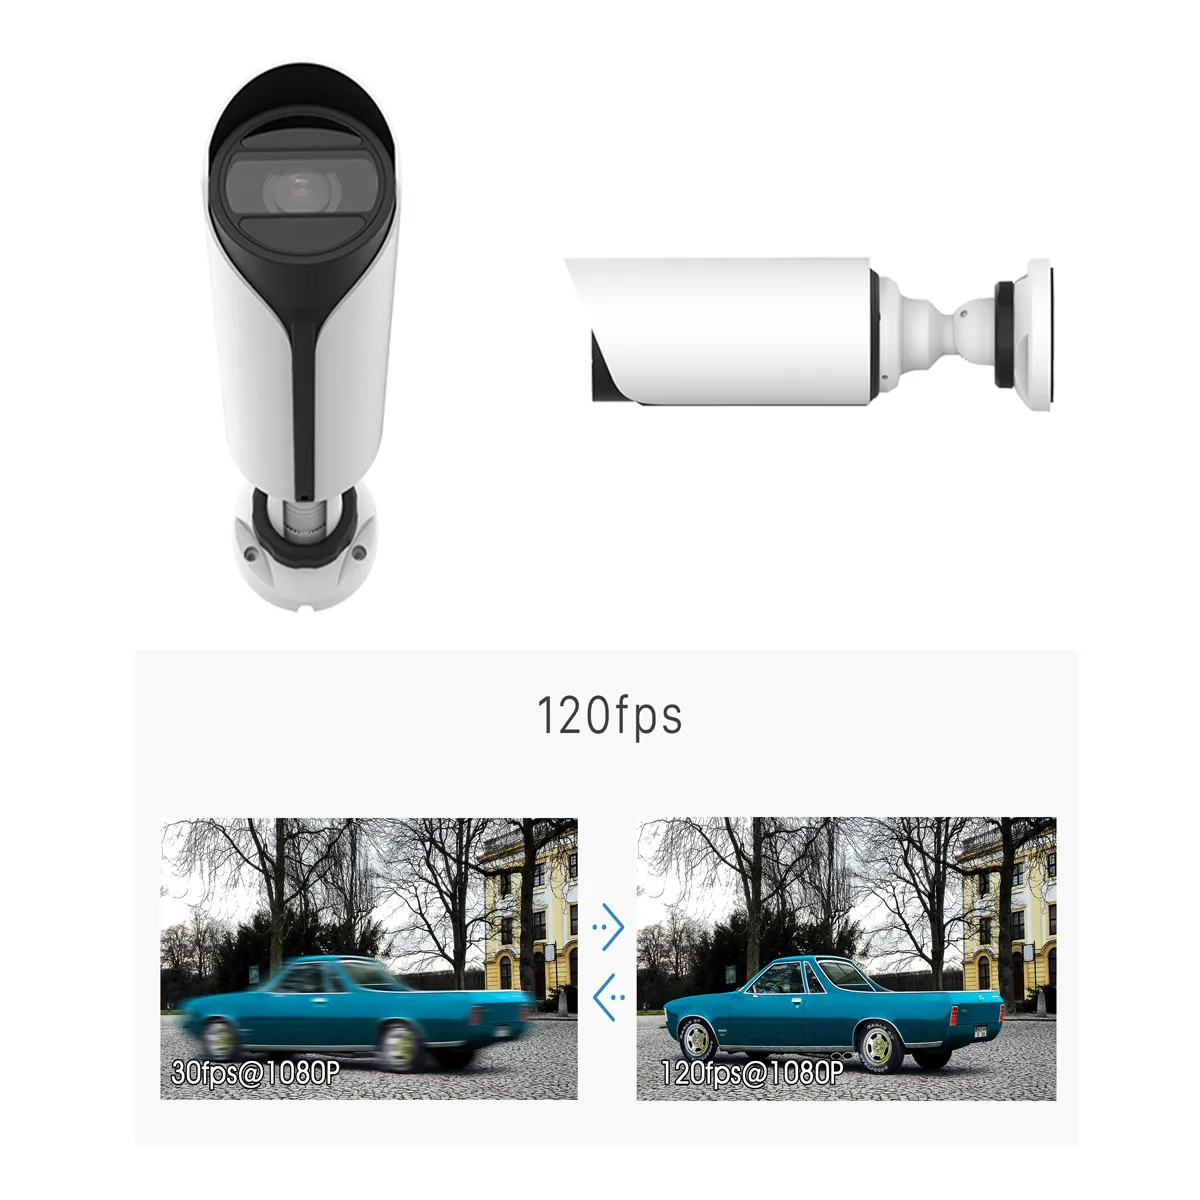 PoE IP67 High Accuracy 140DB WDR Water-proof Night Version Vehicle Plates Recognition Camera